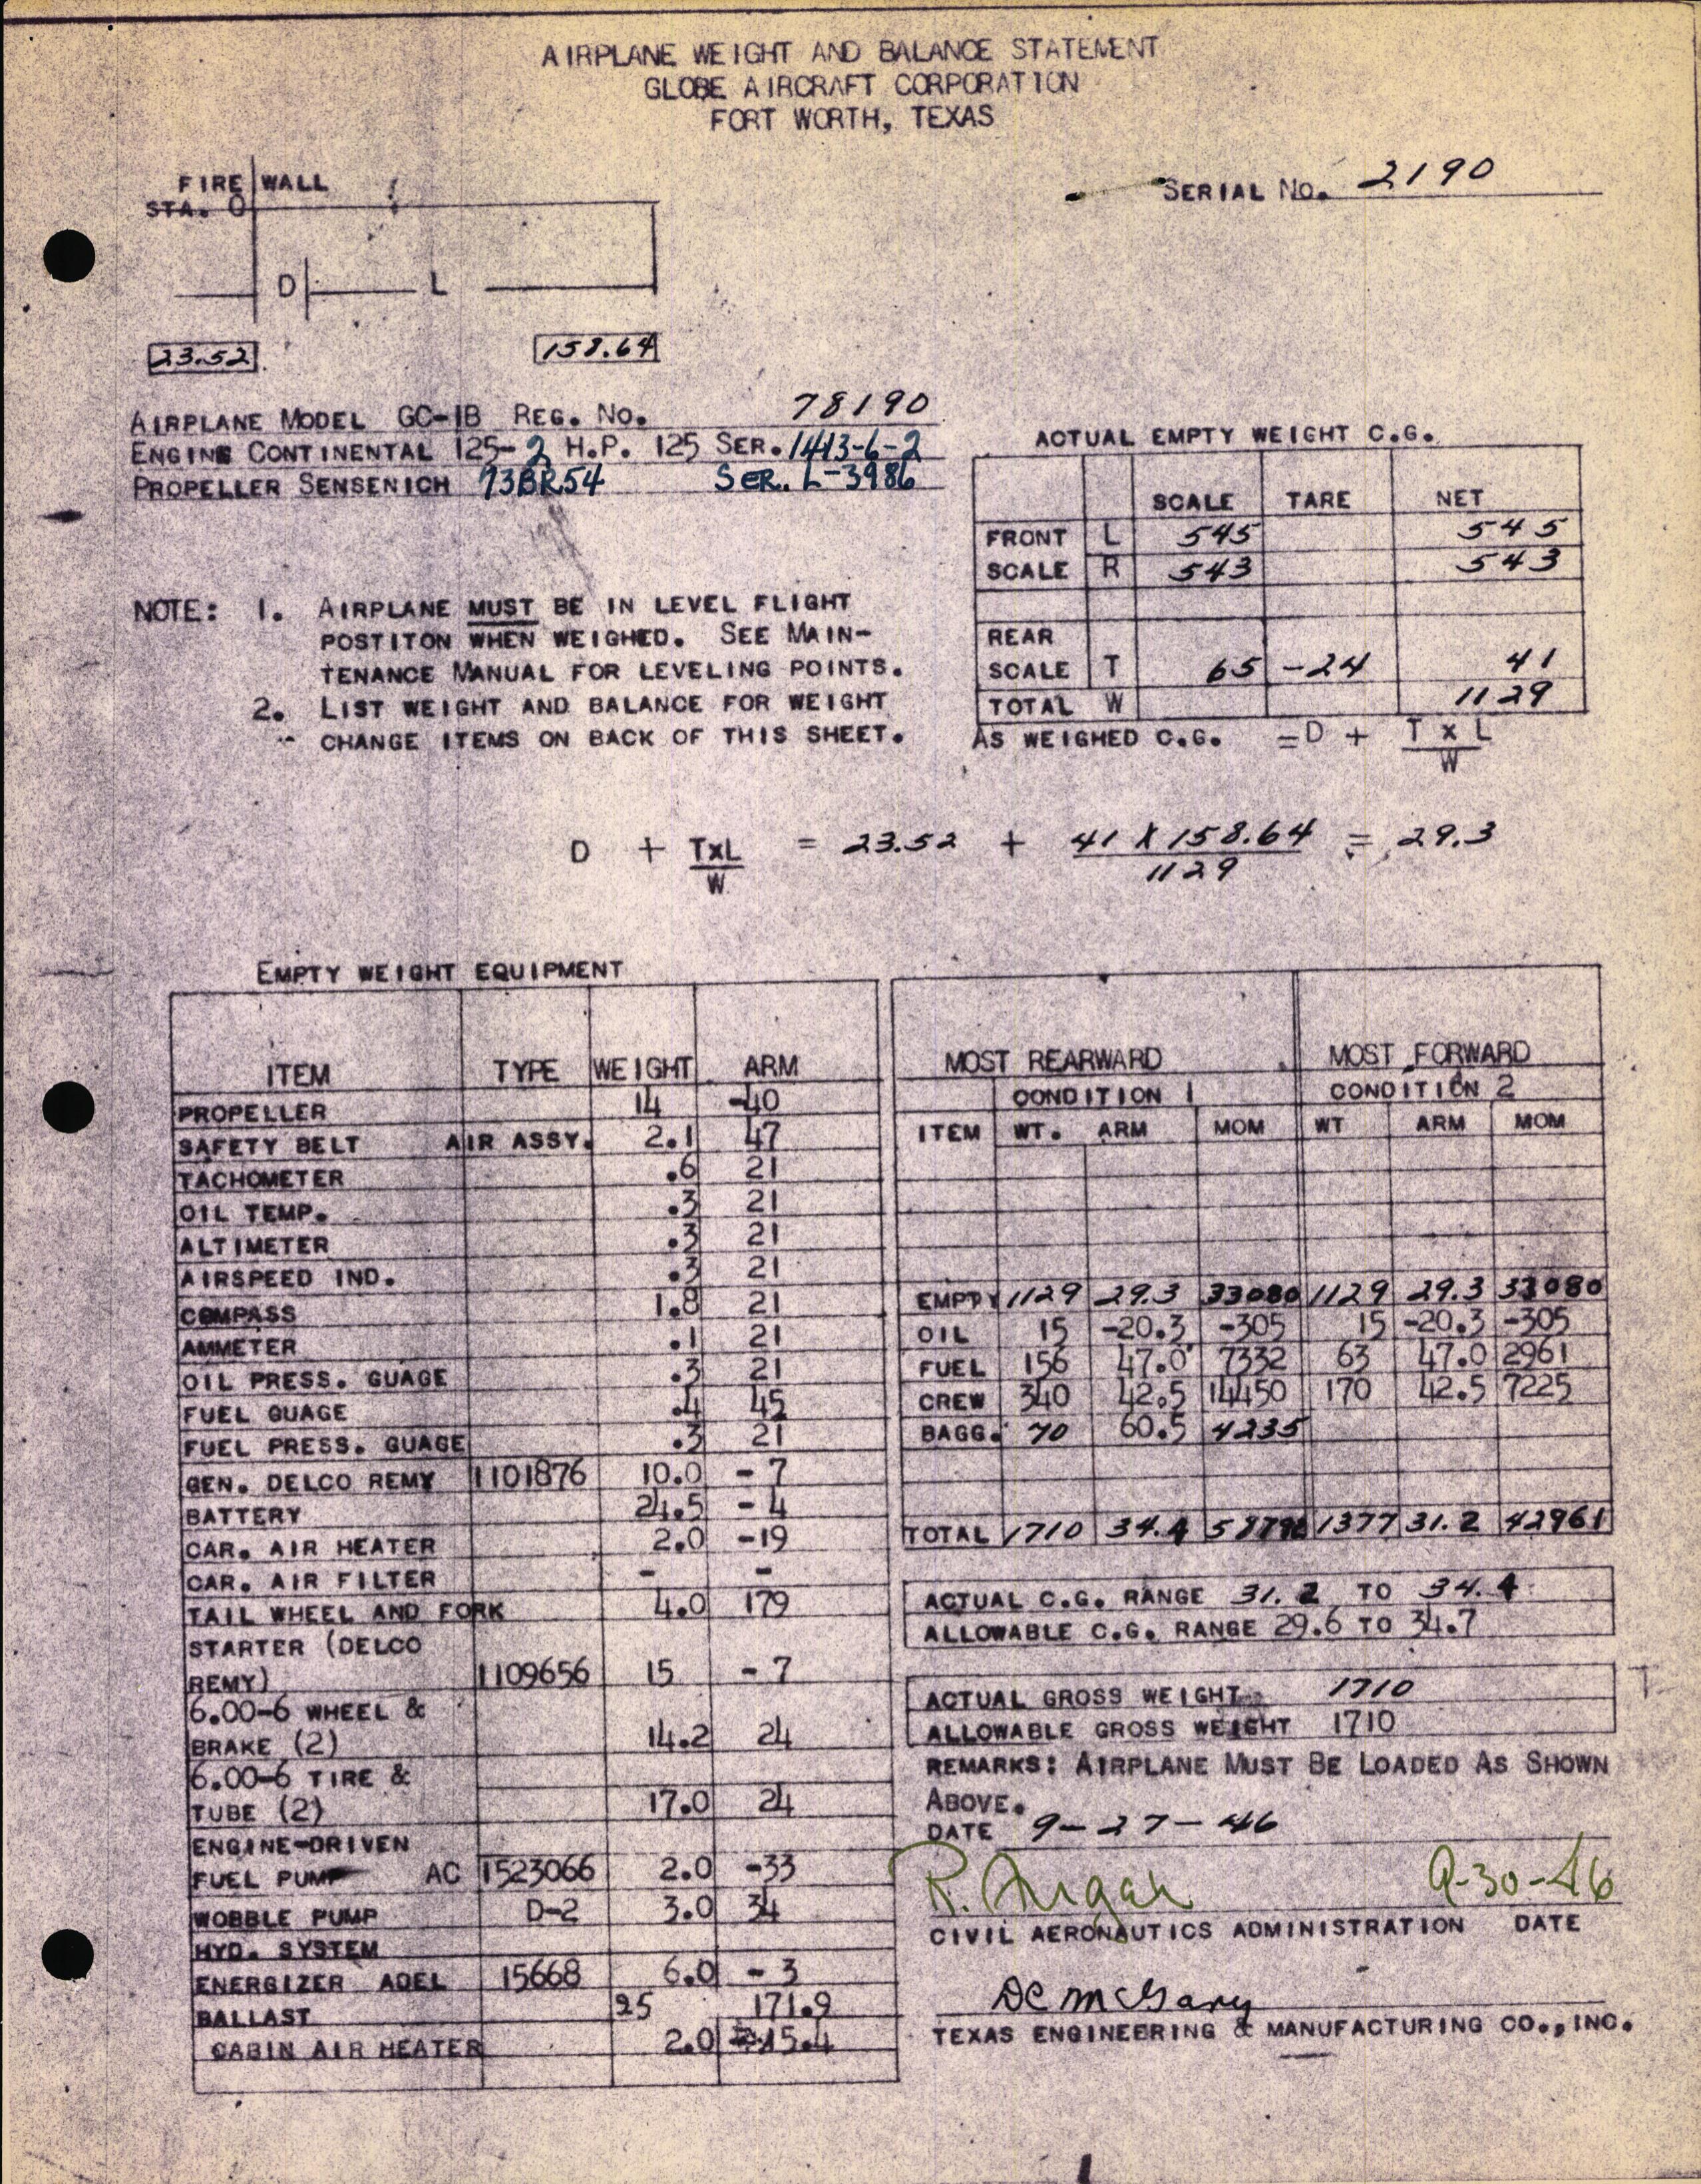 Sample page 1 from AirCorps Library document: Technical Information for Serial Number 2190